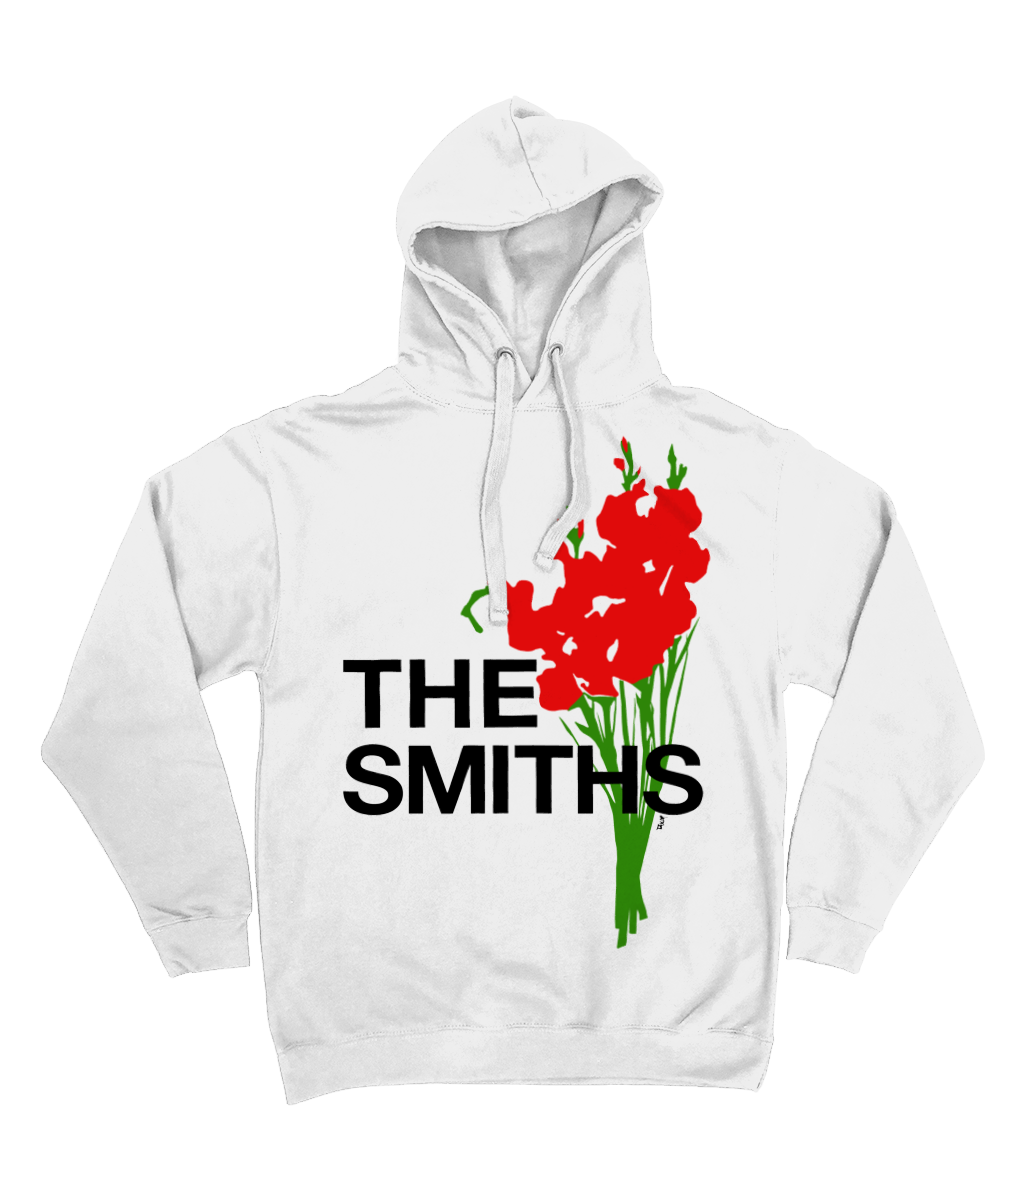 THE SMITHS - 1984 UK Tour - Hoodie